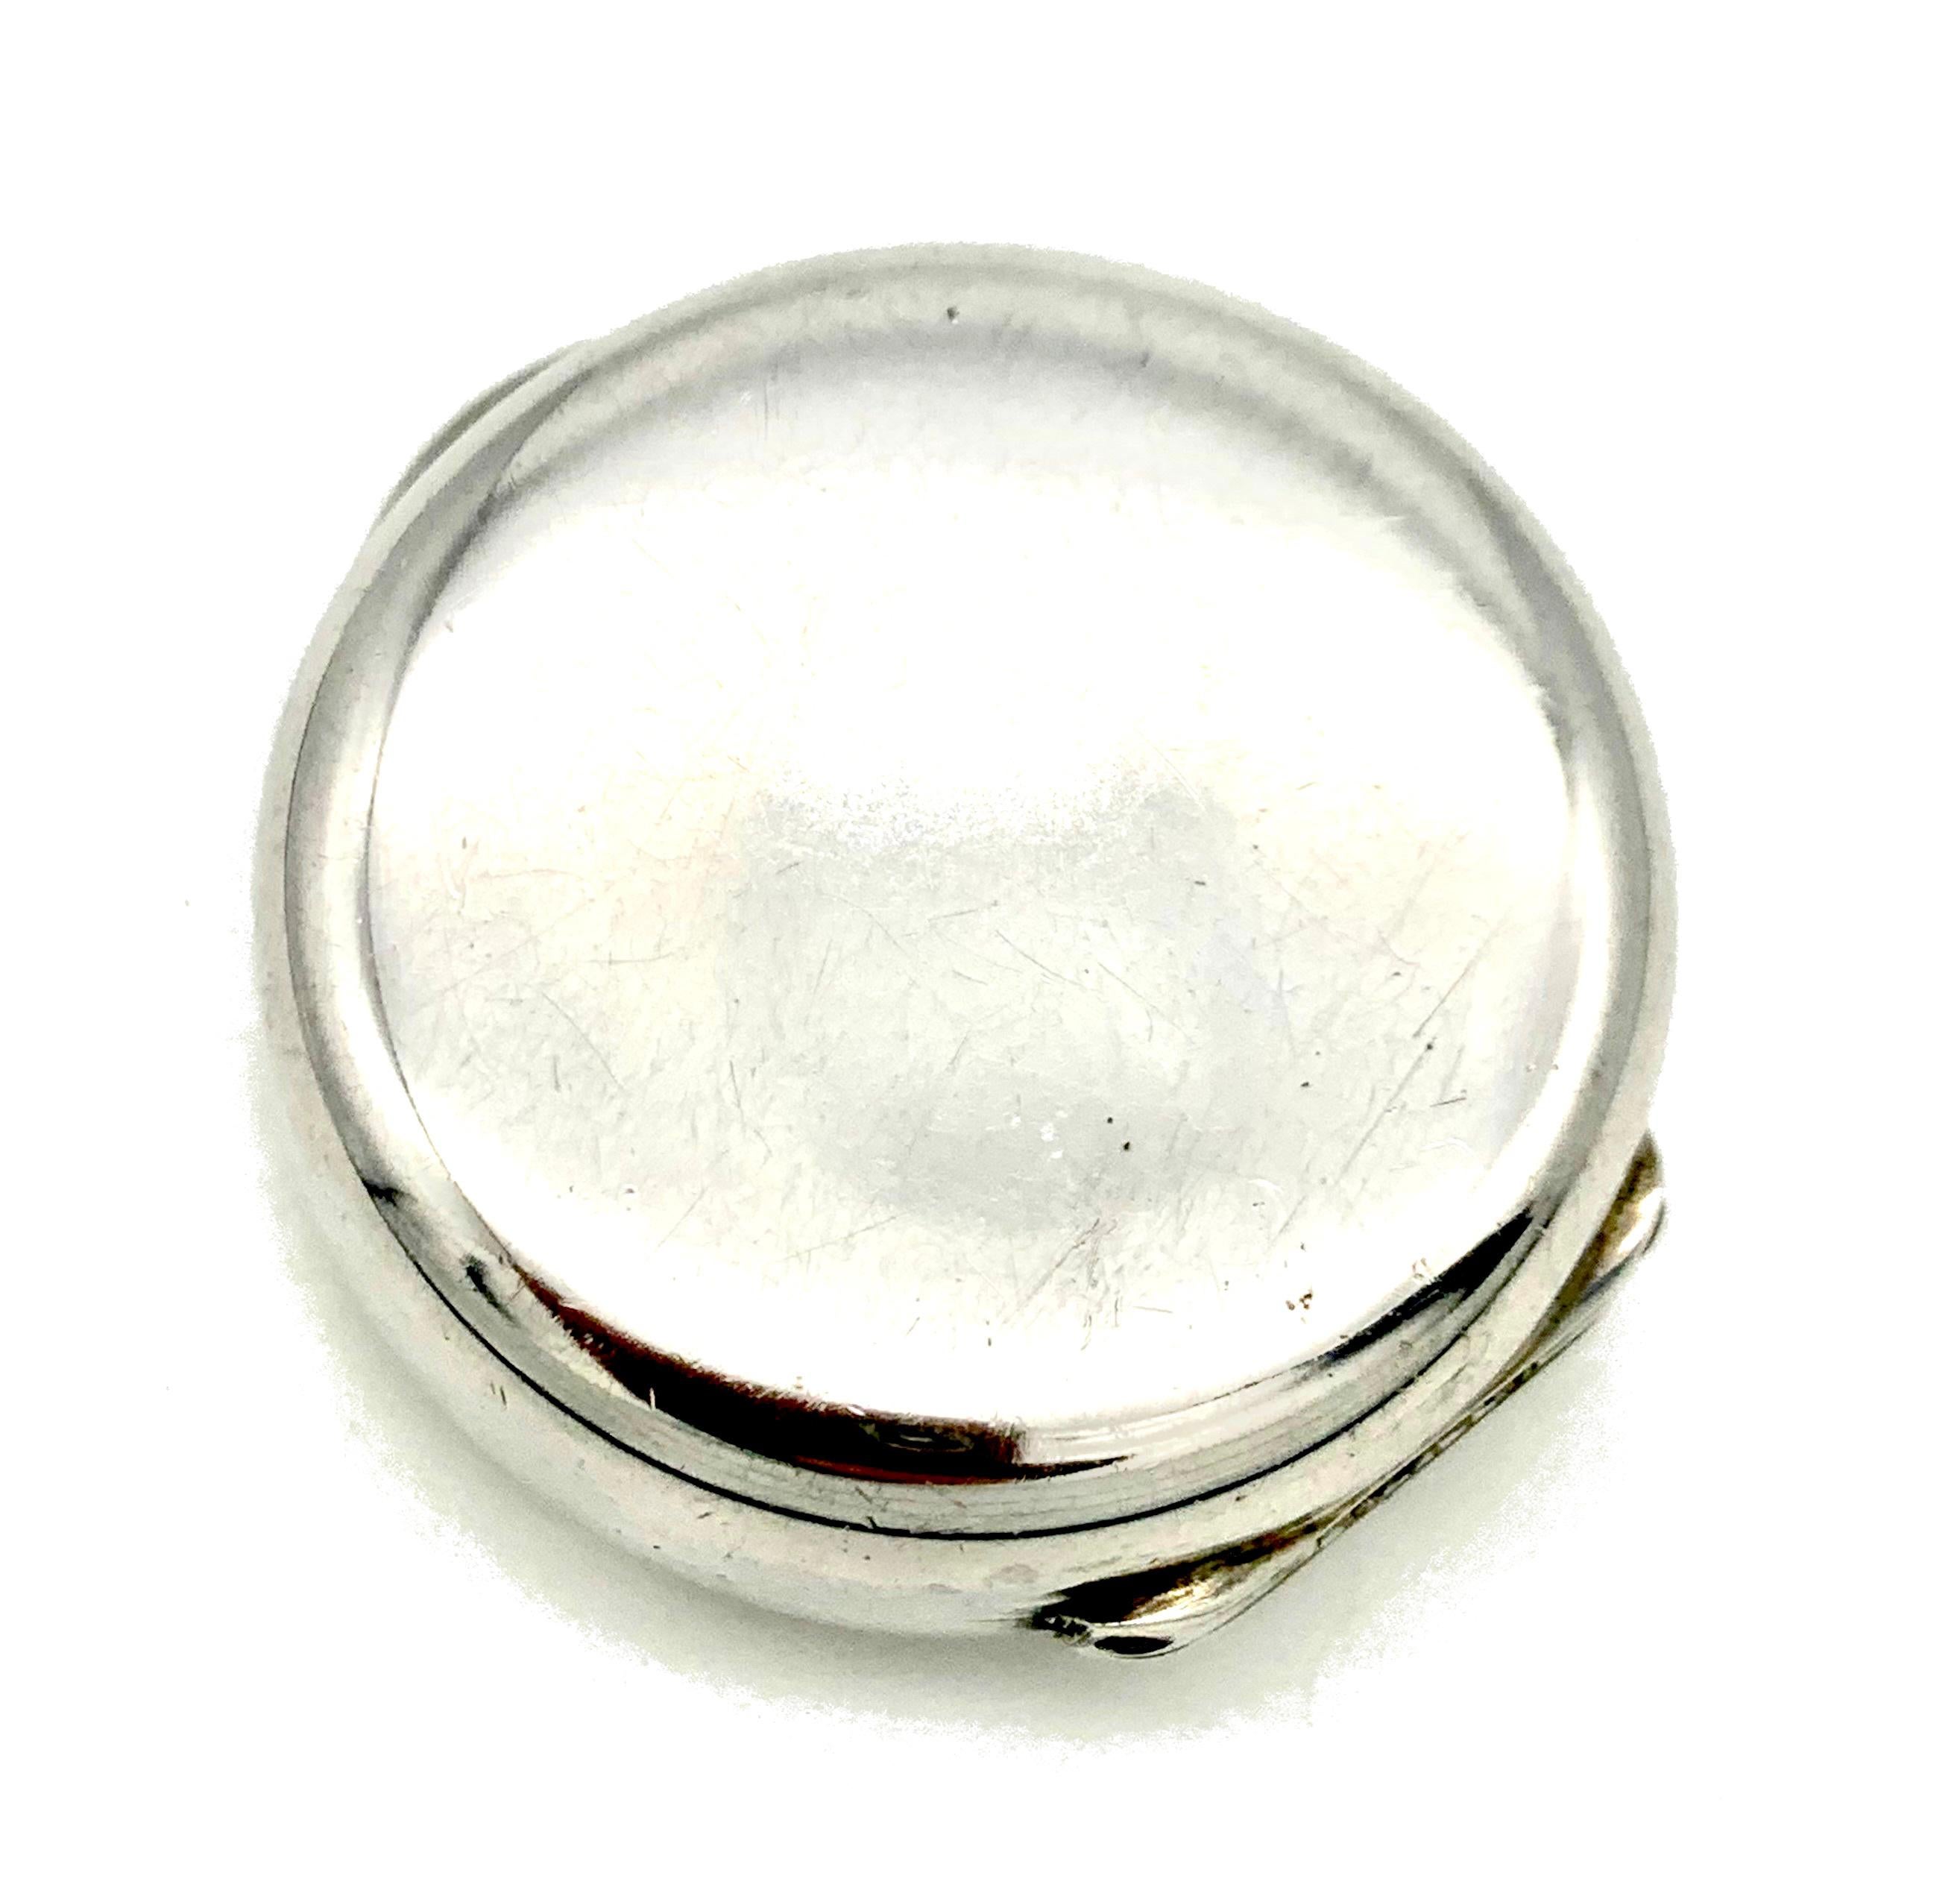 This elegant plain round silver pillbox is stamped 800.  It is accompanied by an Italian stamp in use since the mid 1930's. The box has been in use and has some very light superficial scratches but no dents.  